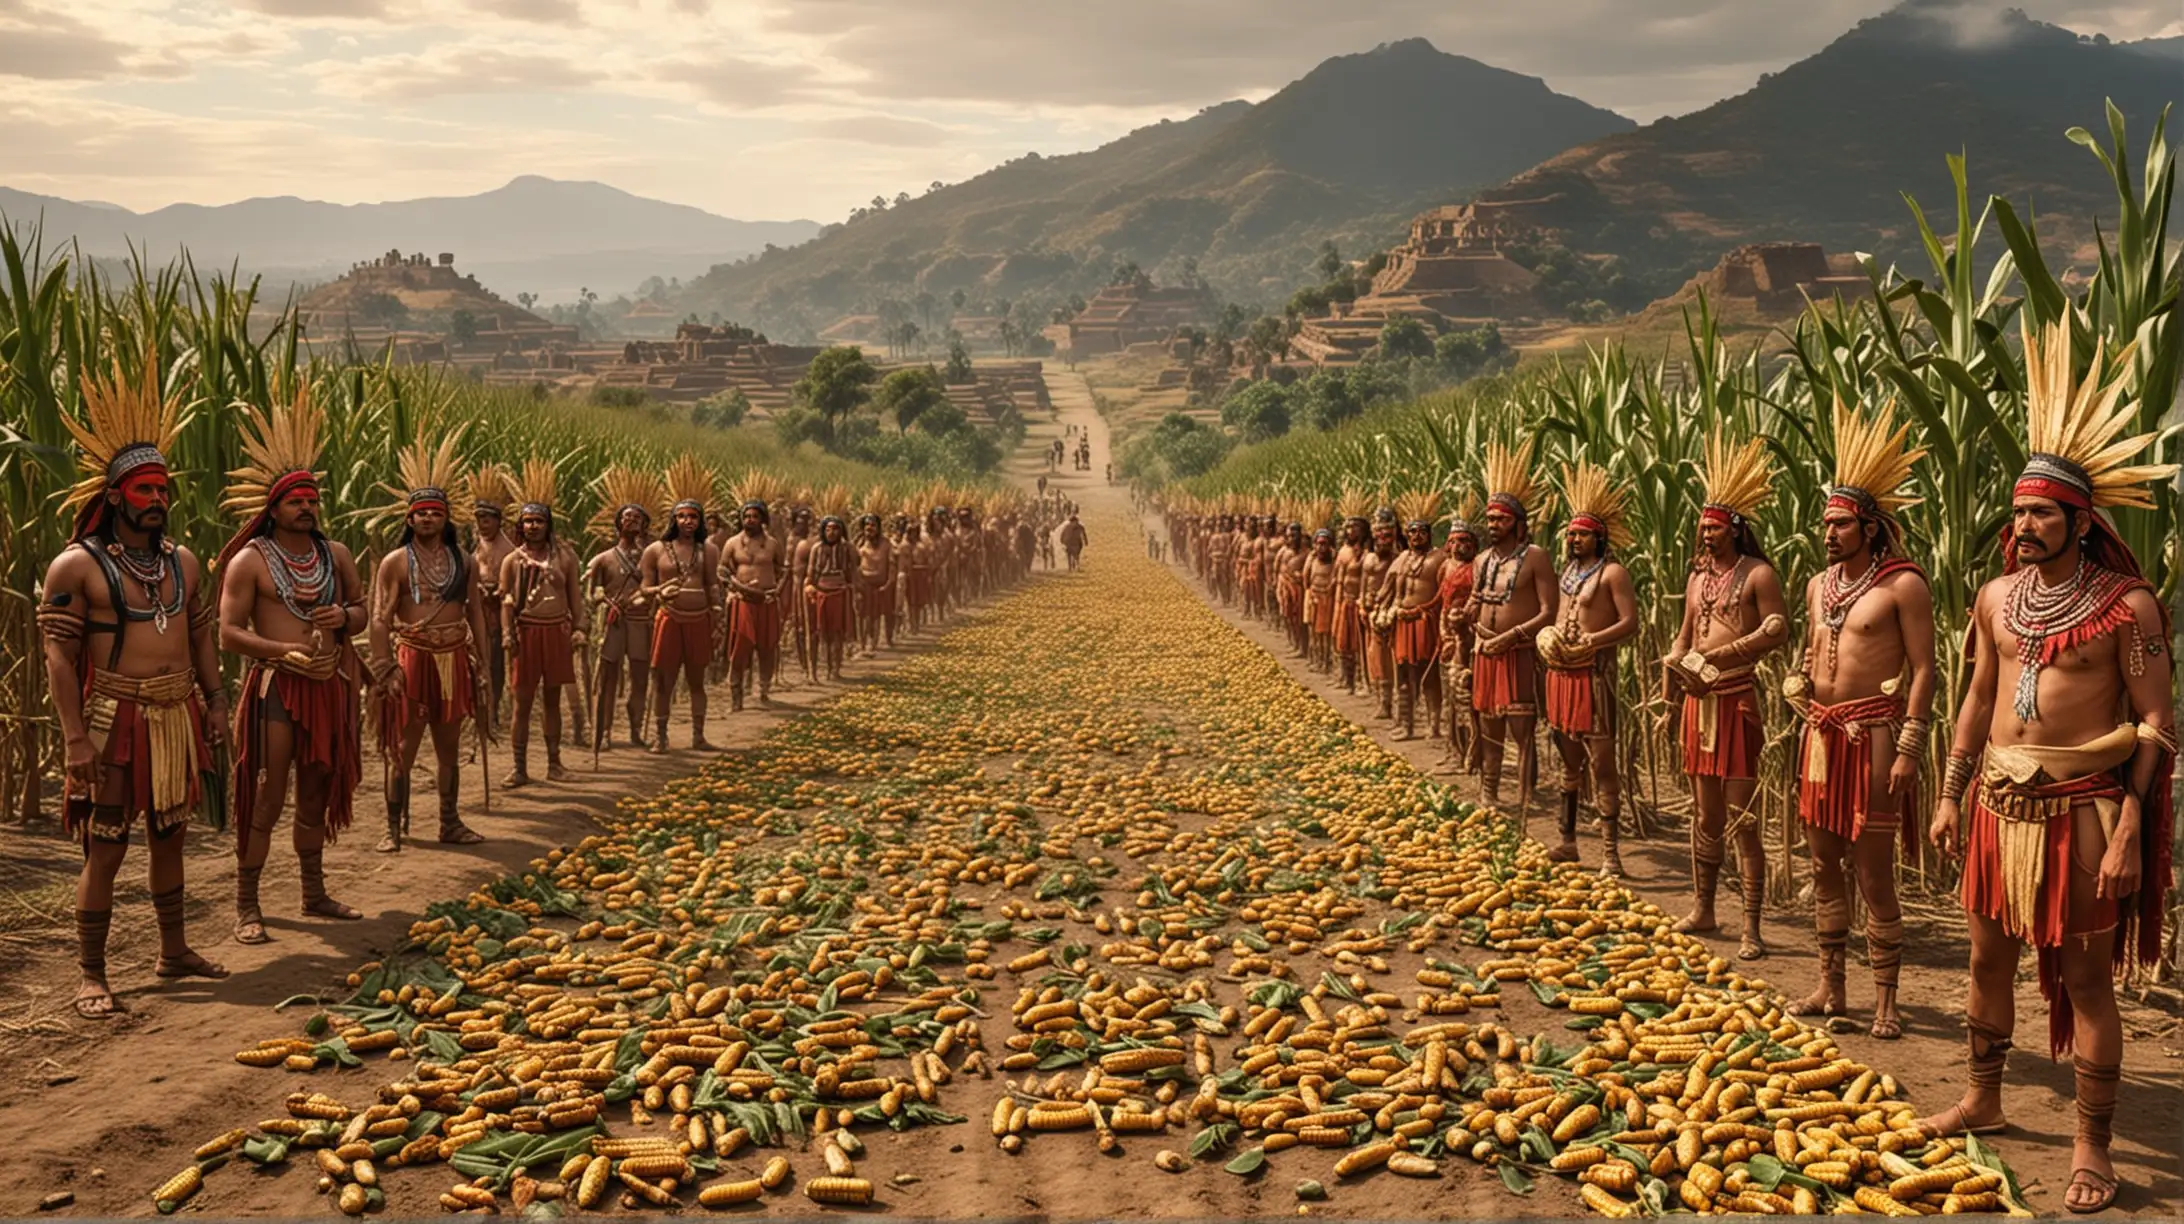 Aztec Agriculture Corn Cultivation in Ancient Times